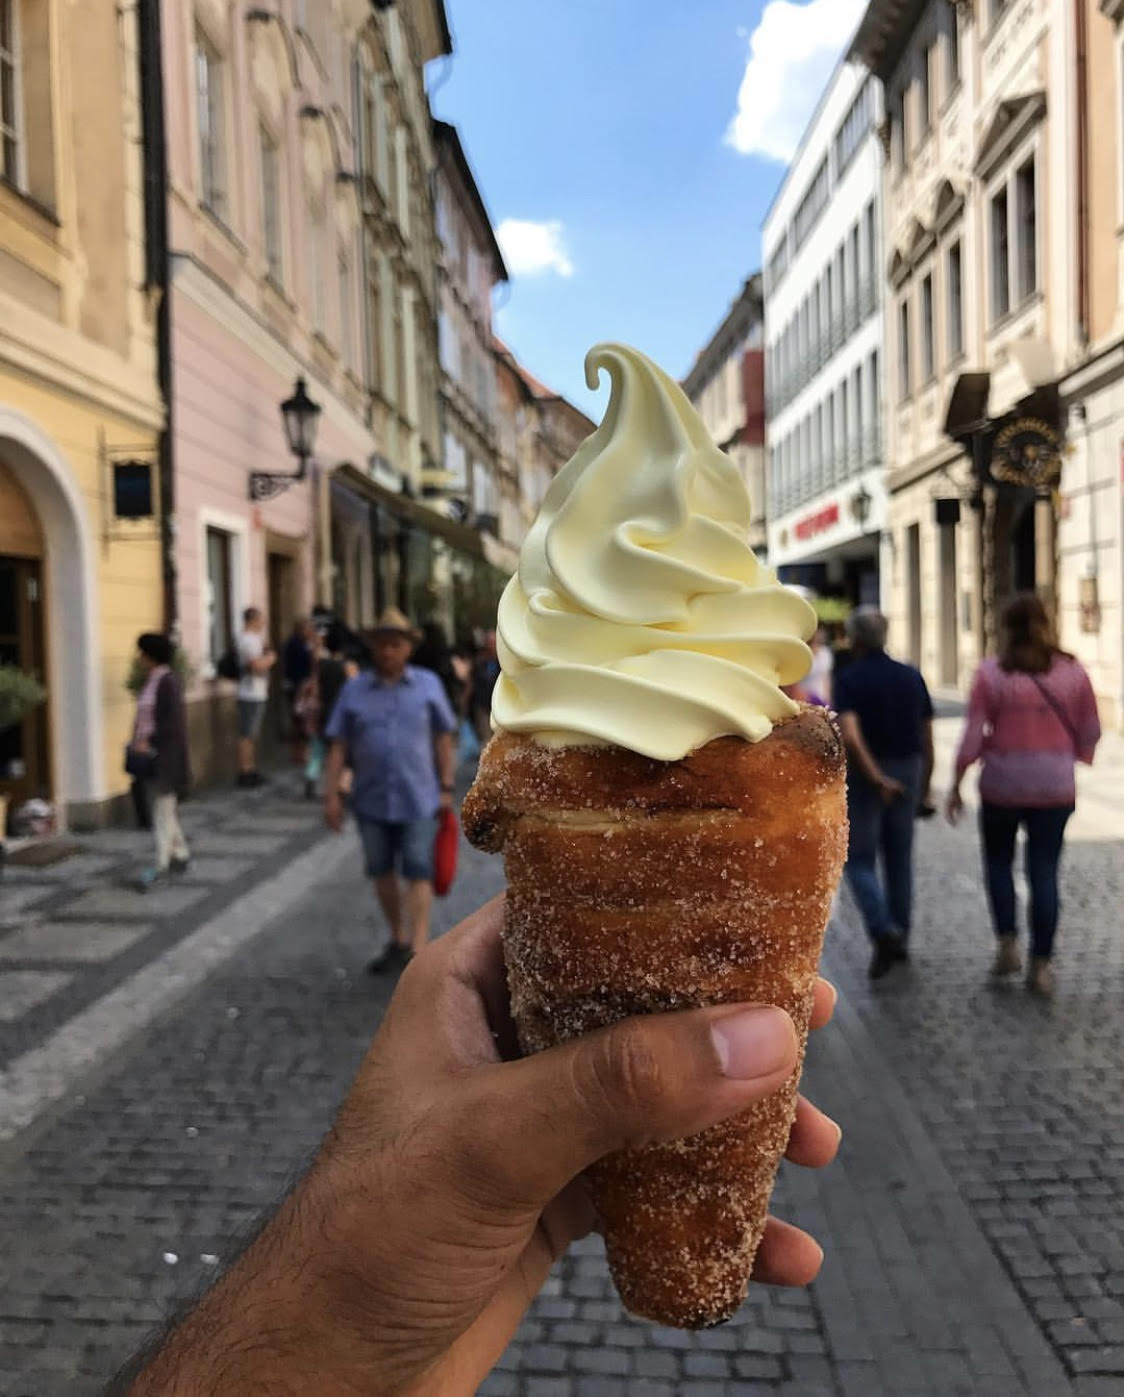 What are chimney cakes called in Czech?